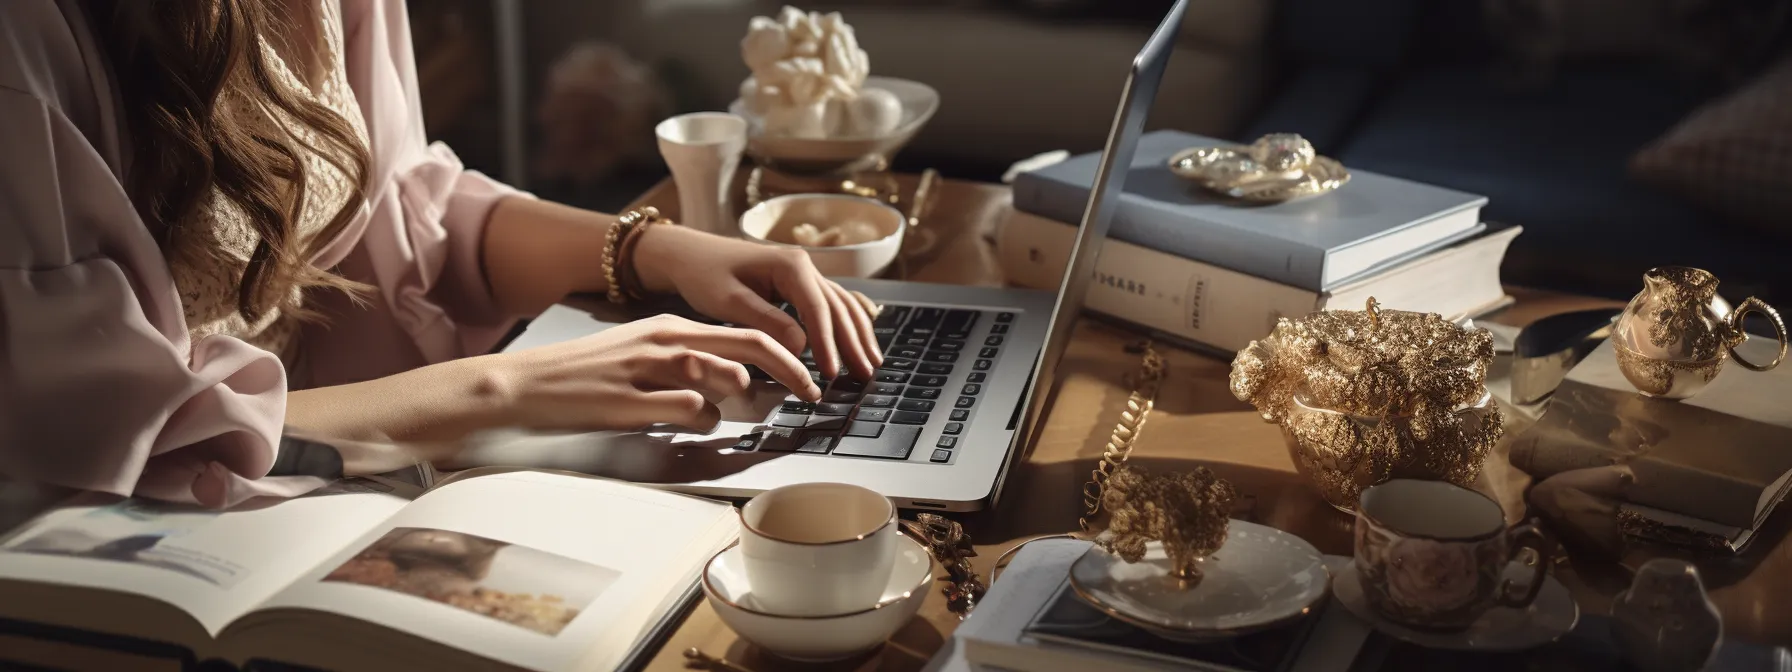 a person typing on a laptop while surrounded by fashion accessories and a stack of books on guest blogging and link building.